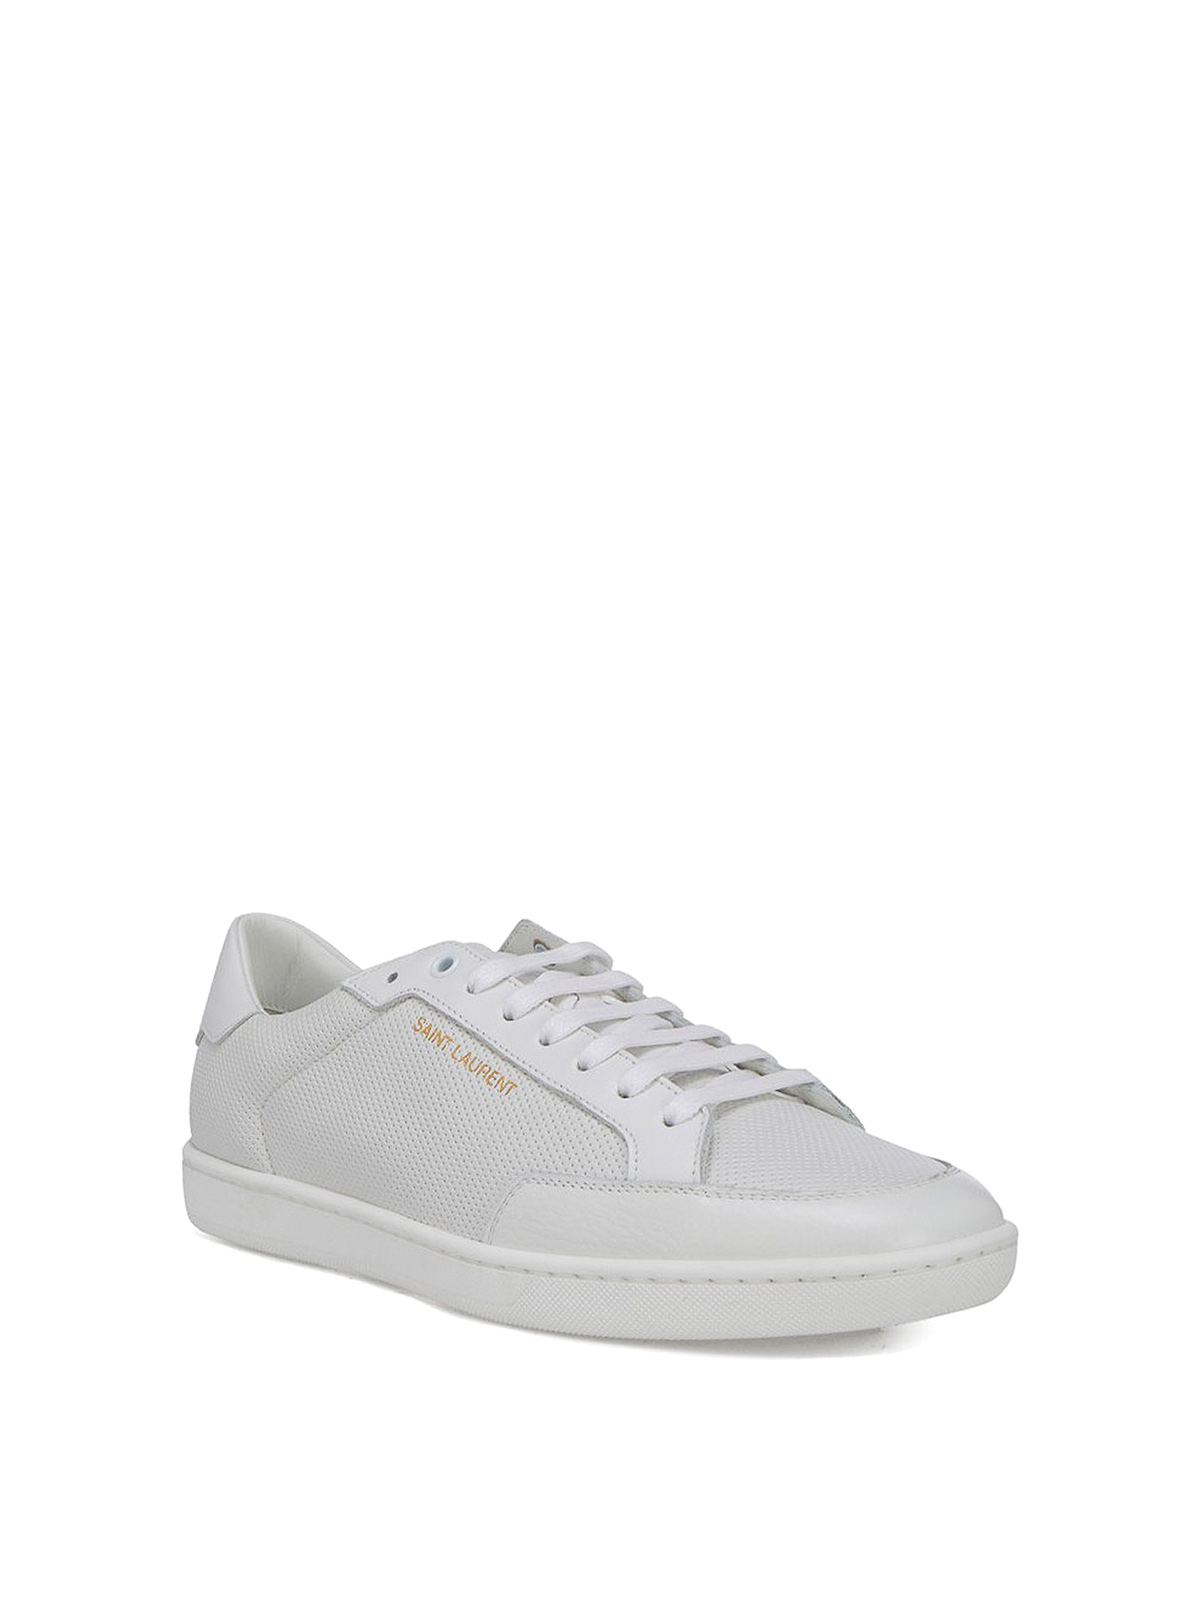 Saint Laurent - Drilled leather sneakers - trainers - 6032231JZ109030